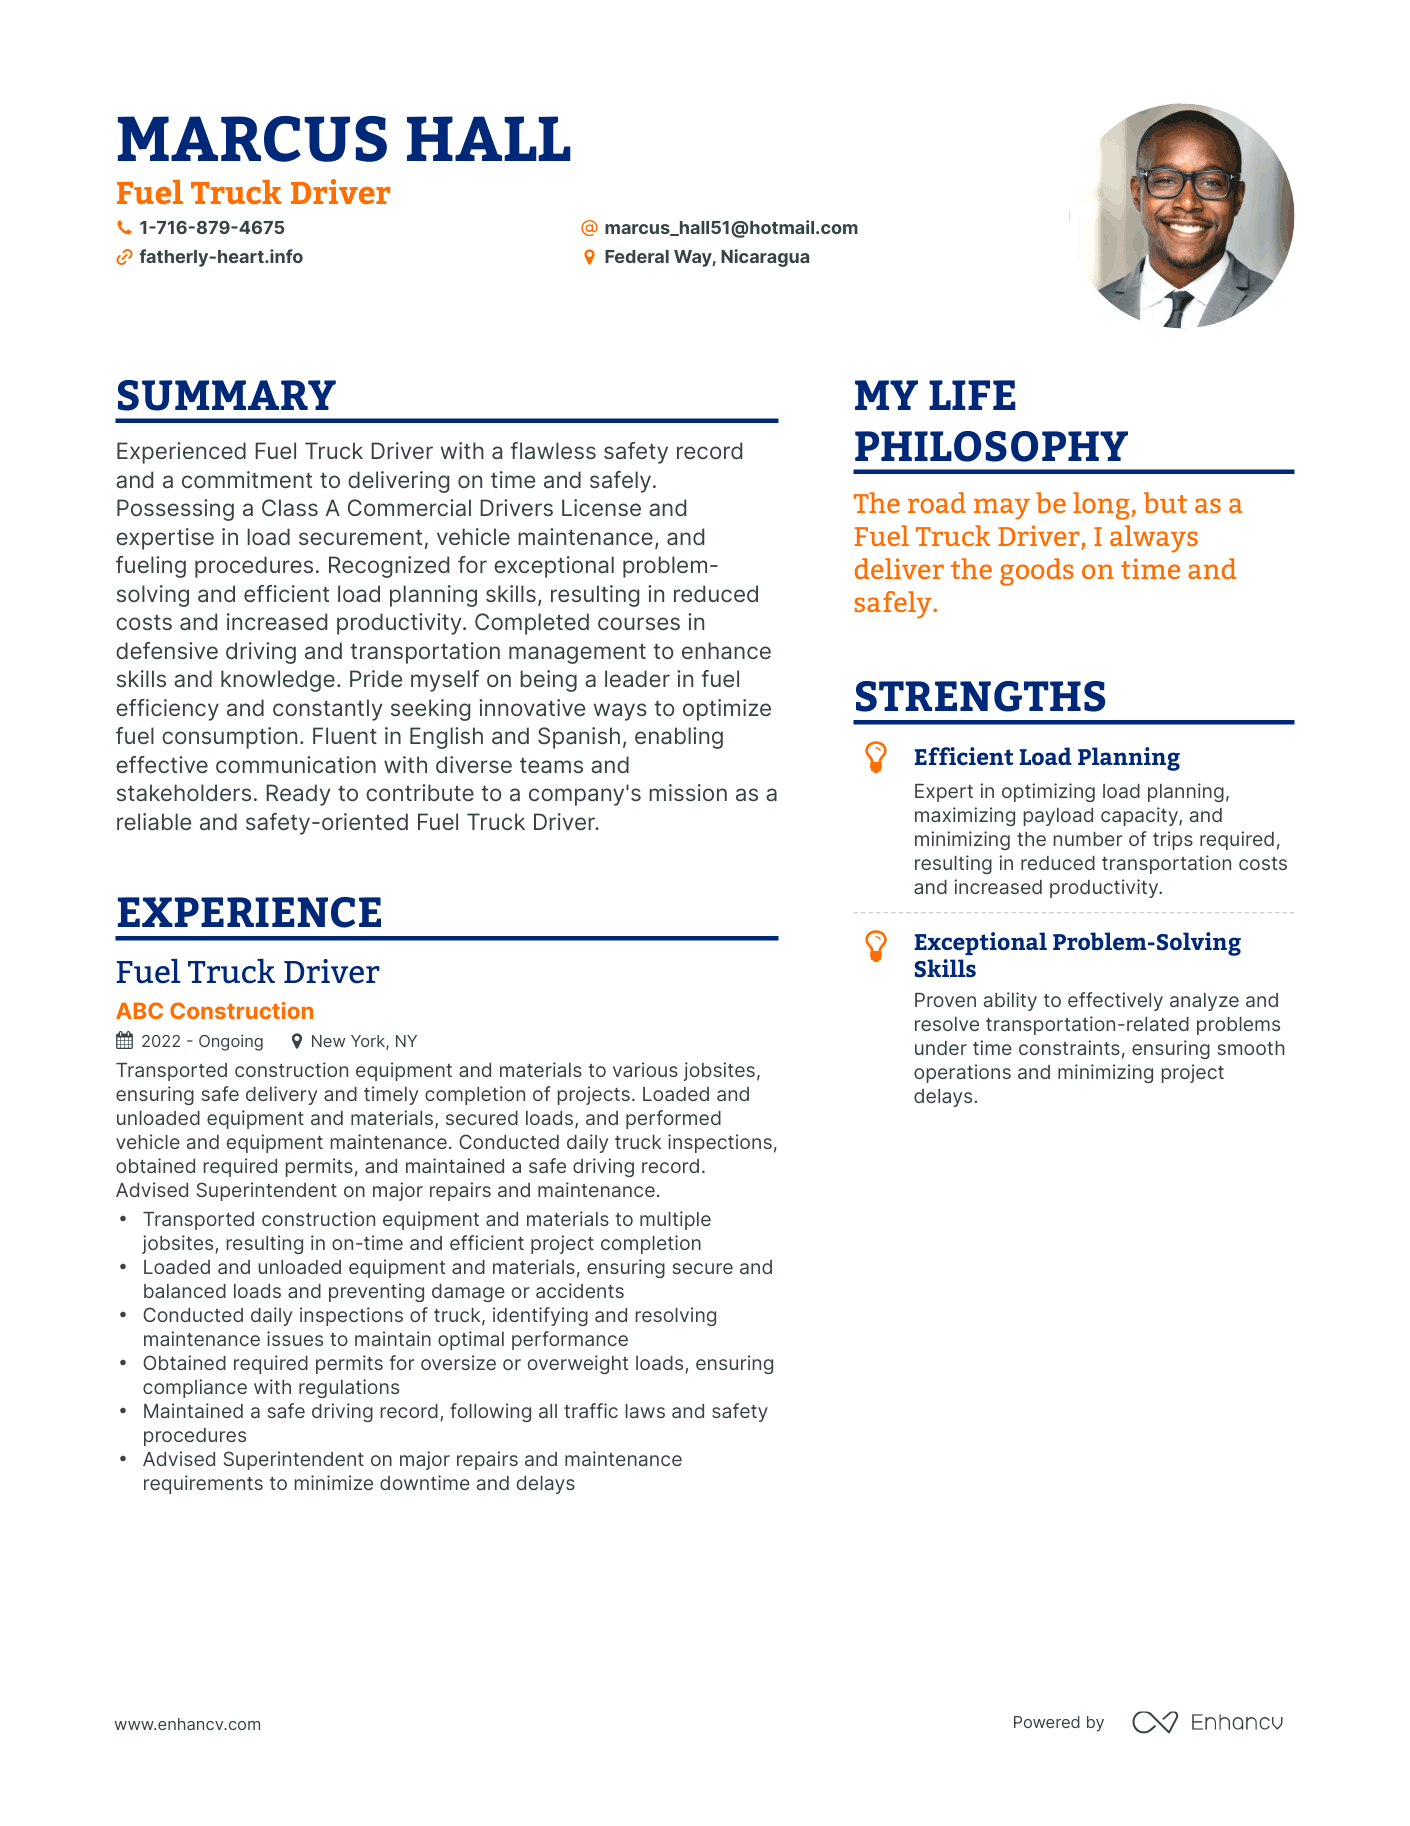 Fuel Truck Driver resume example